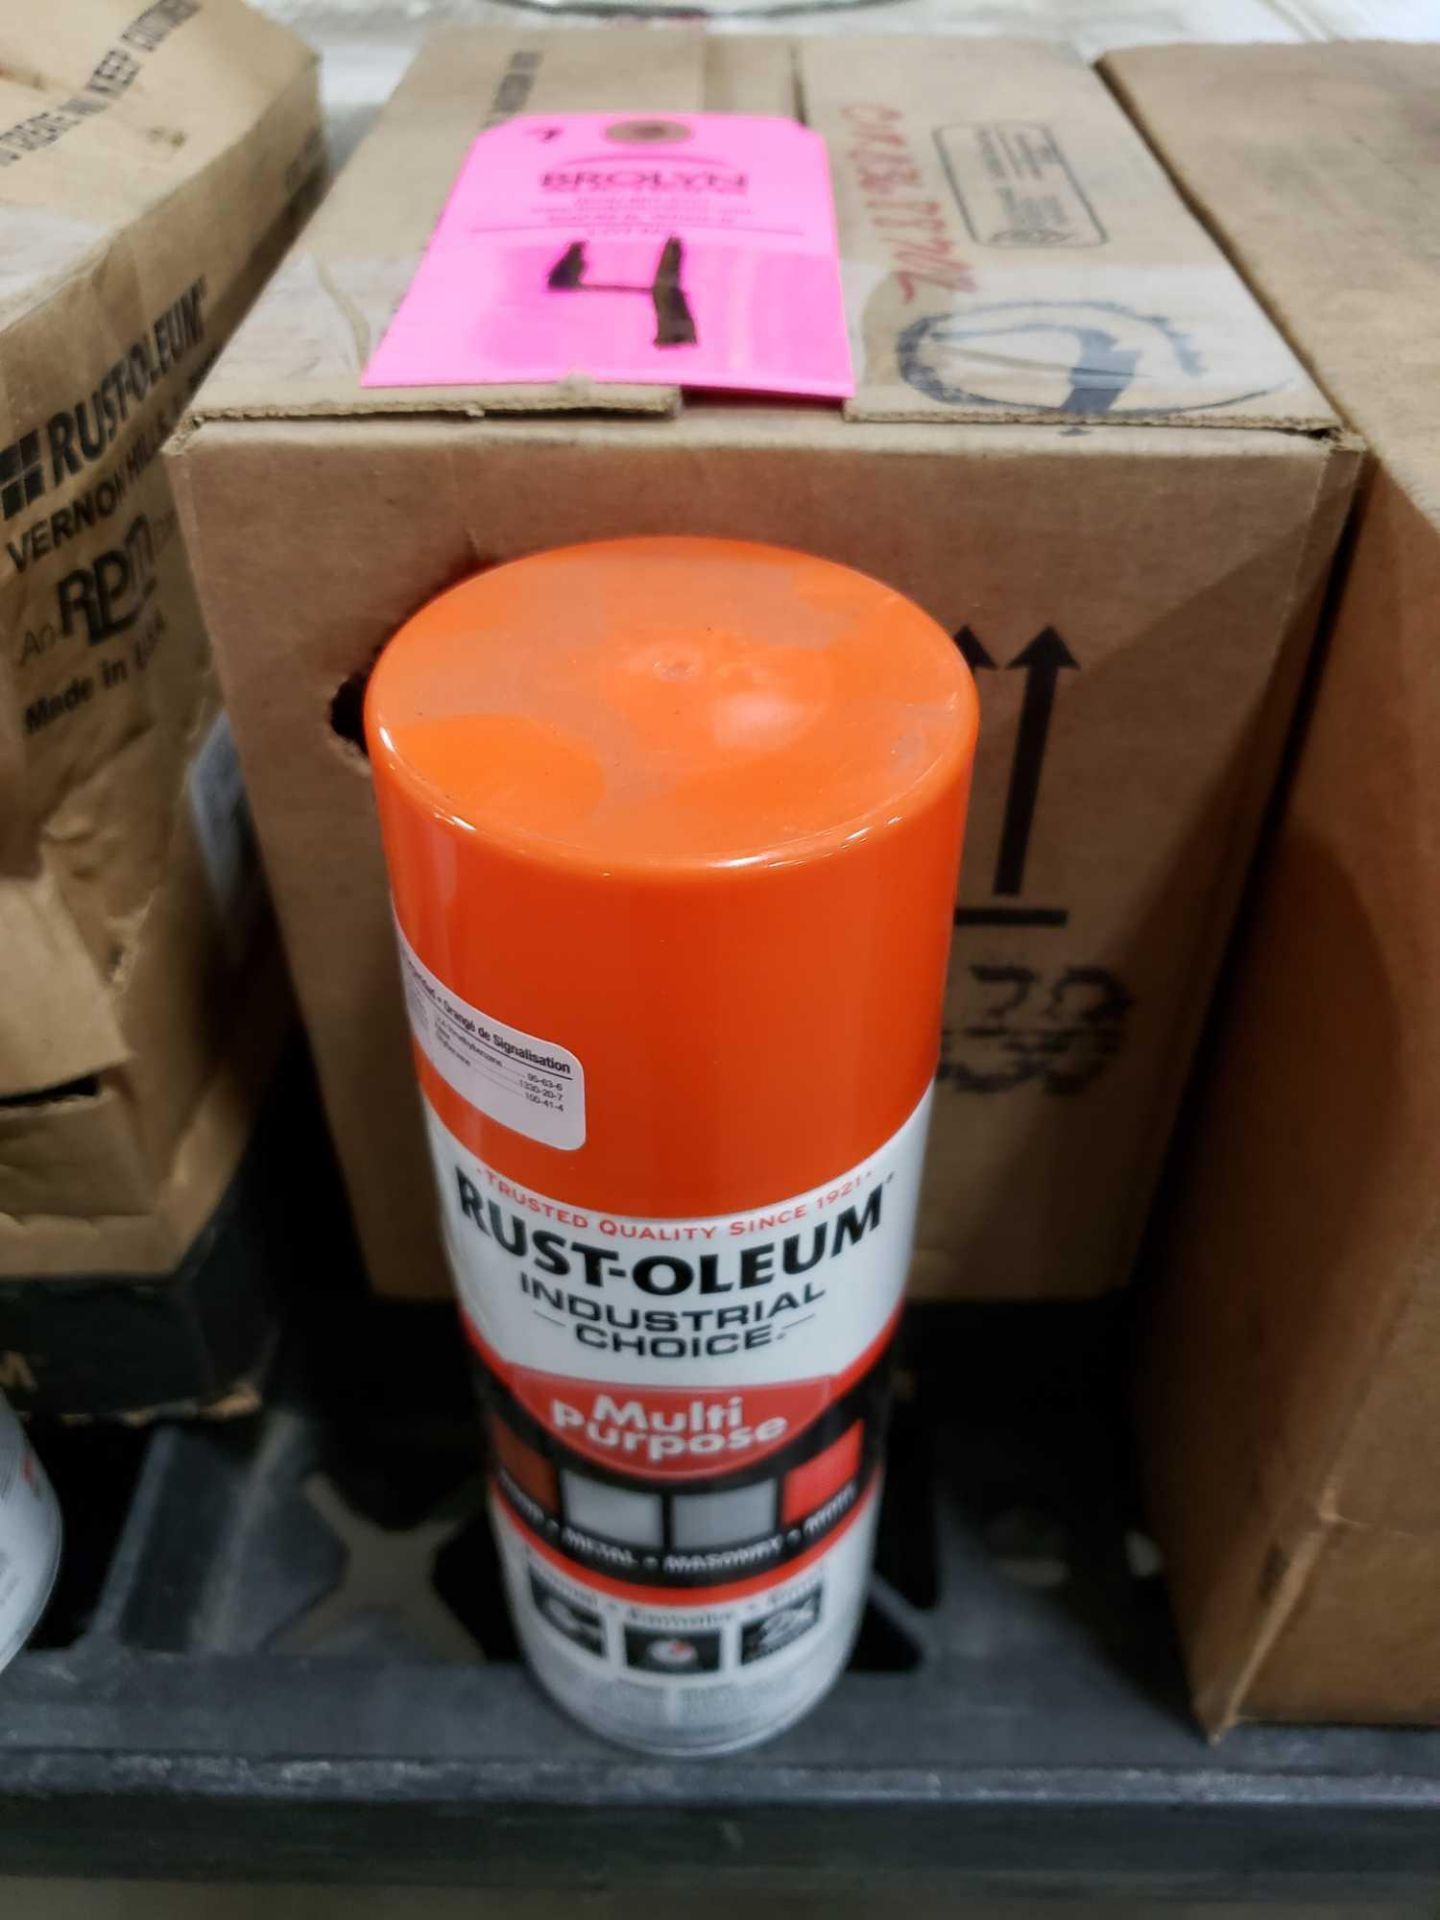 Qty 7 - Rustoleum Industrial Choice multi-purpose paint Orange. New as pictured.